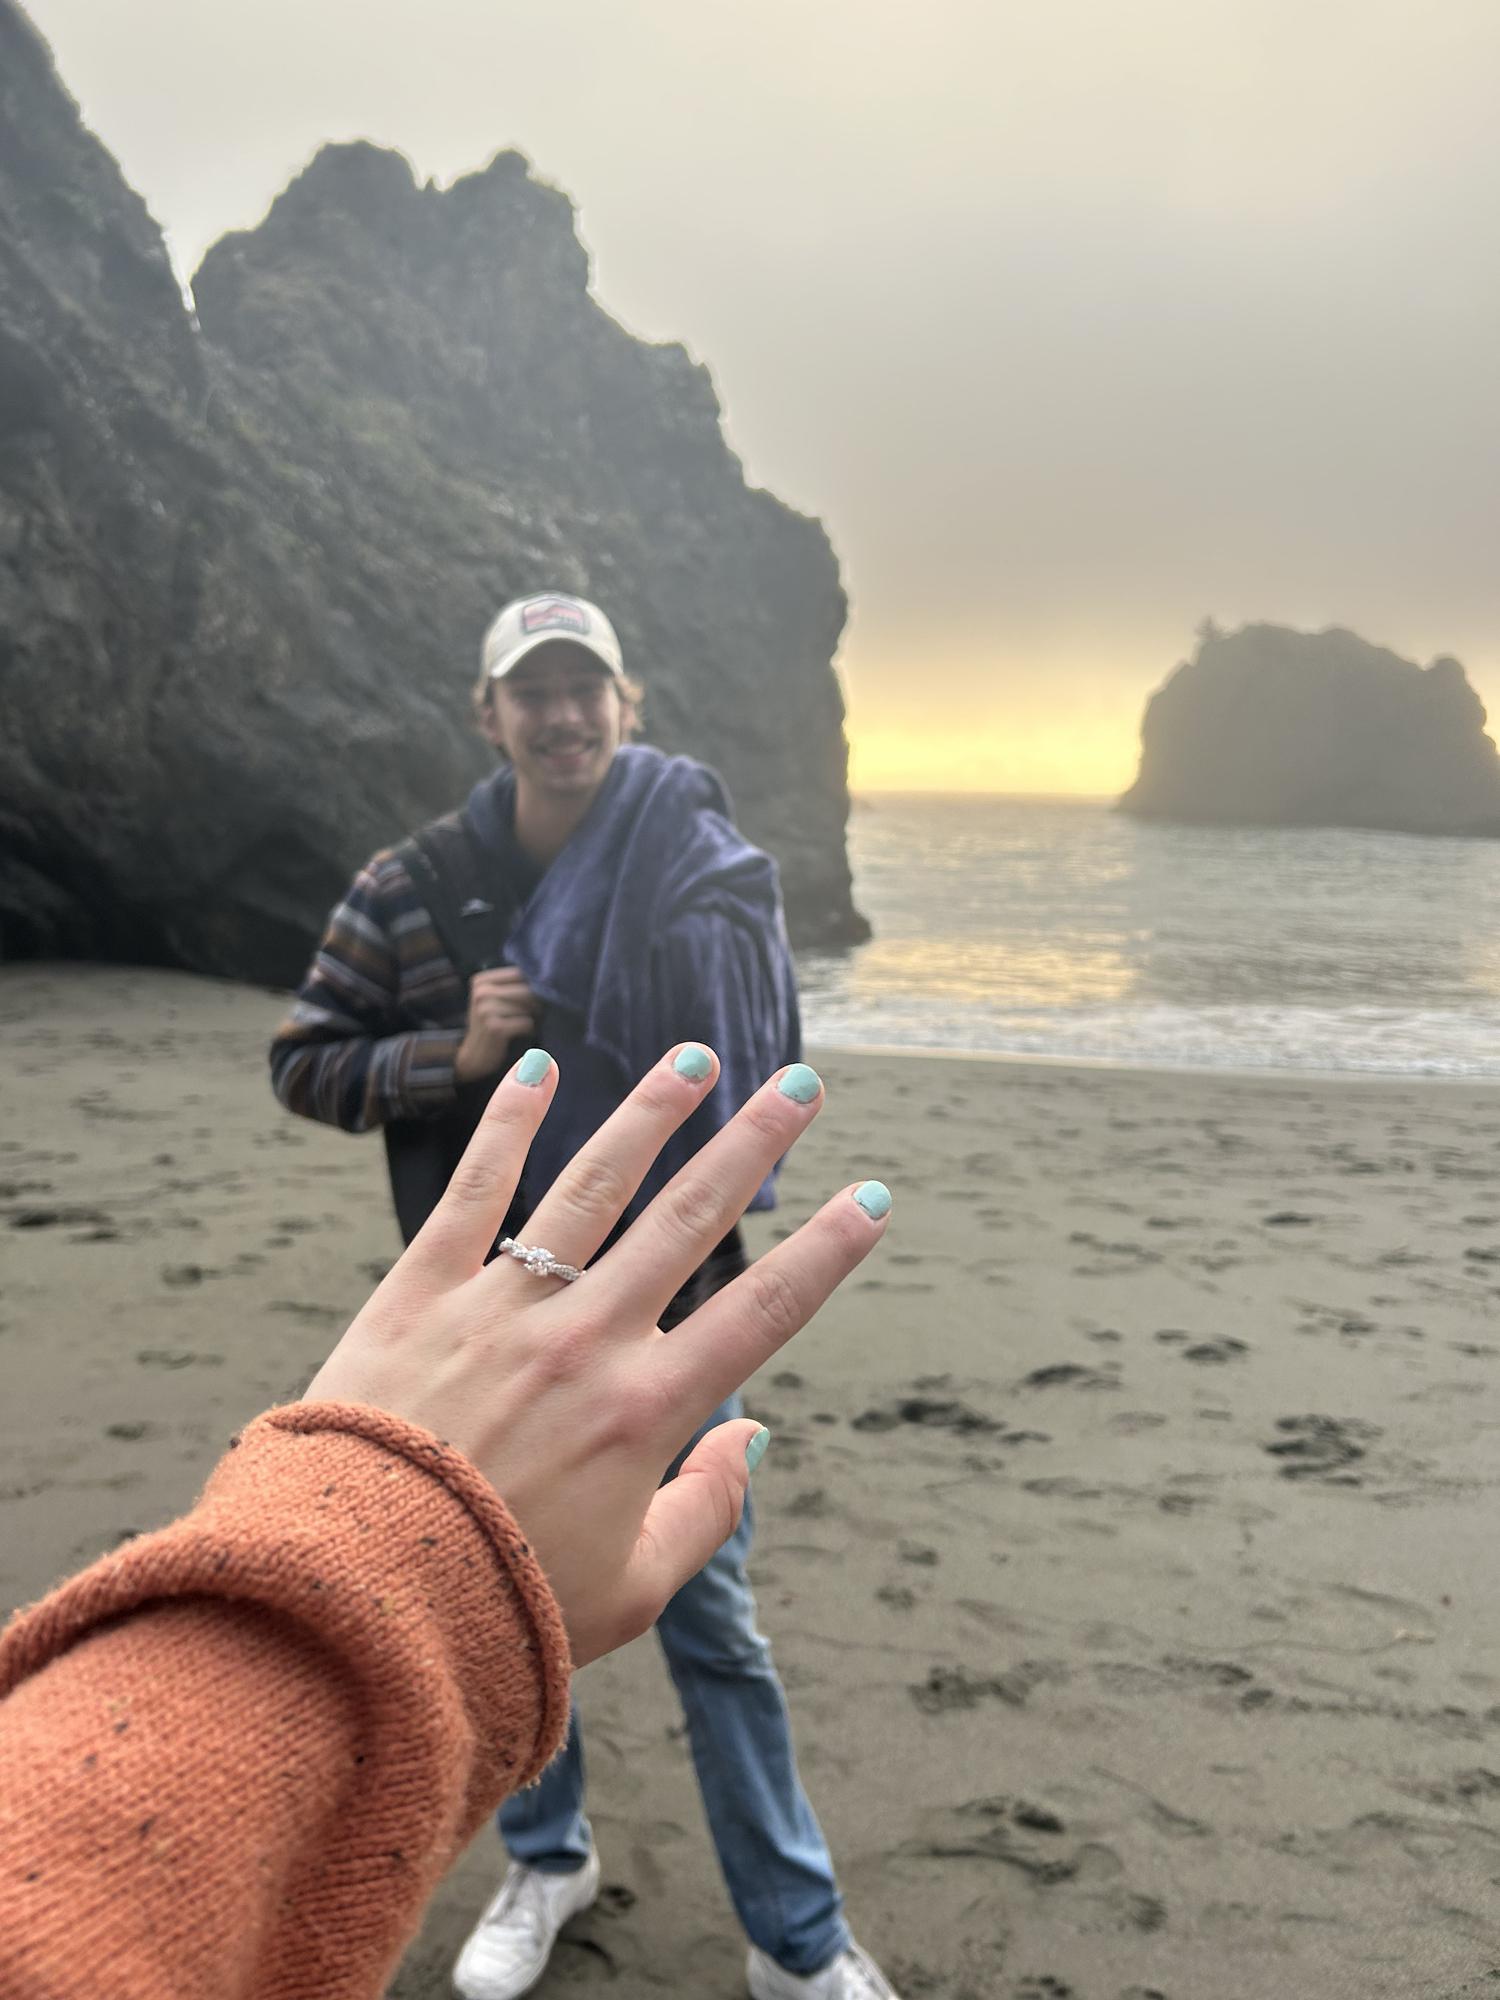 To the day I said “Yes!”